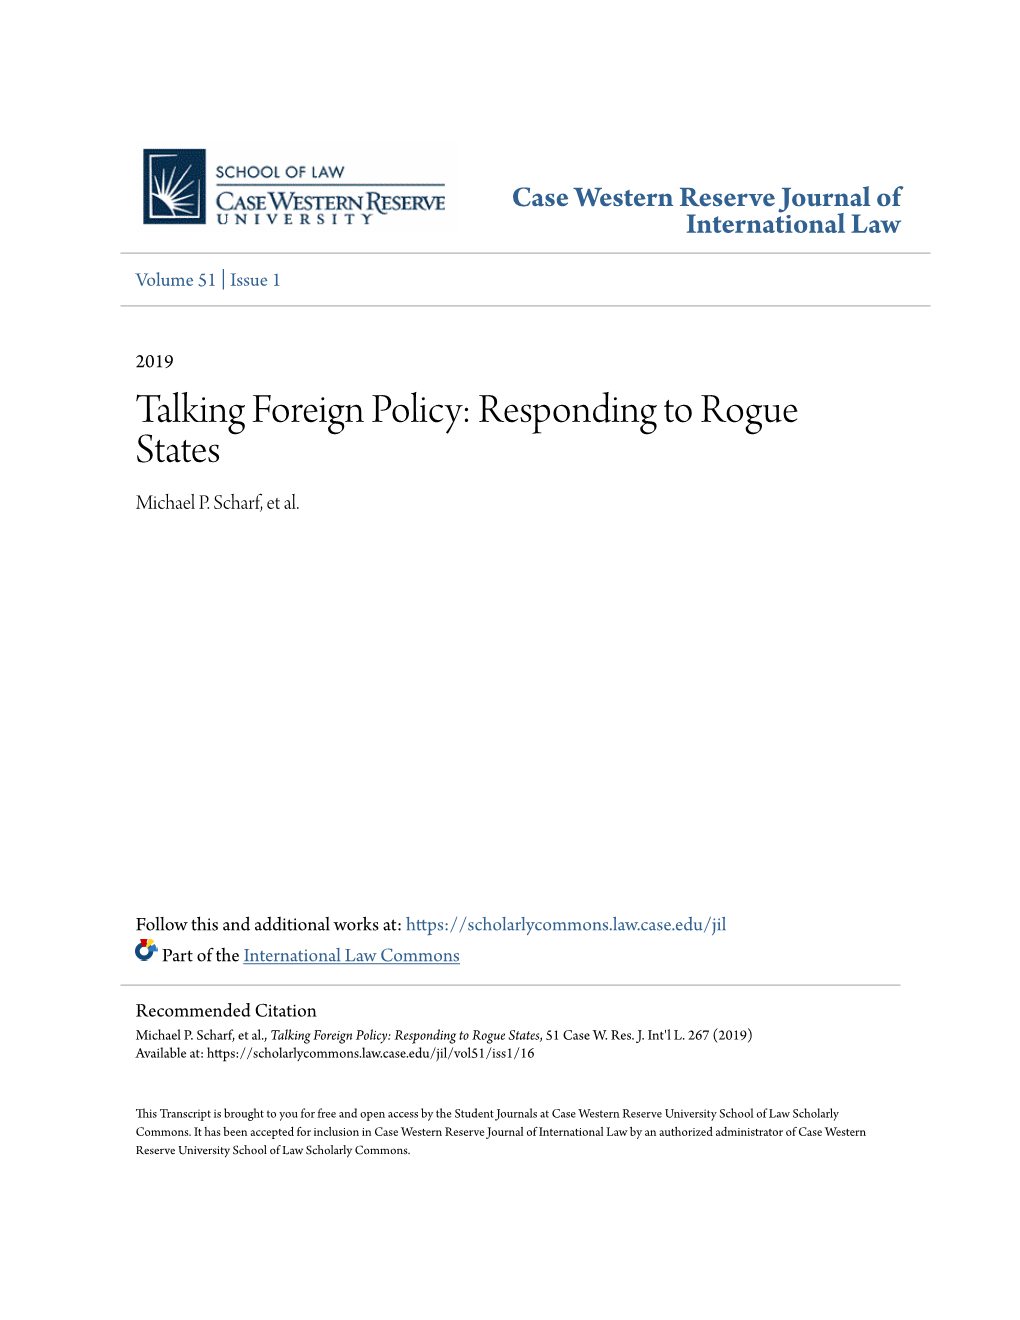 Responding to Rogue States Michael P